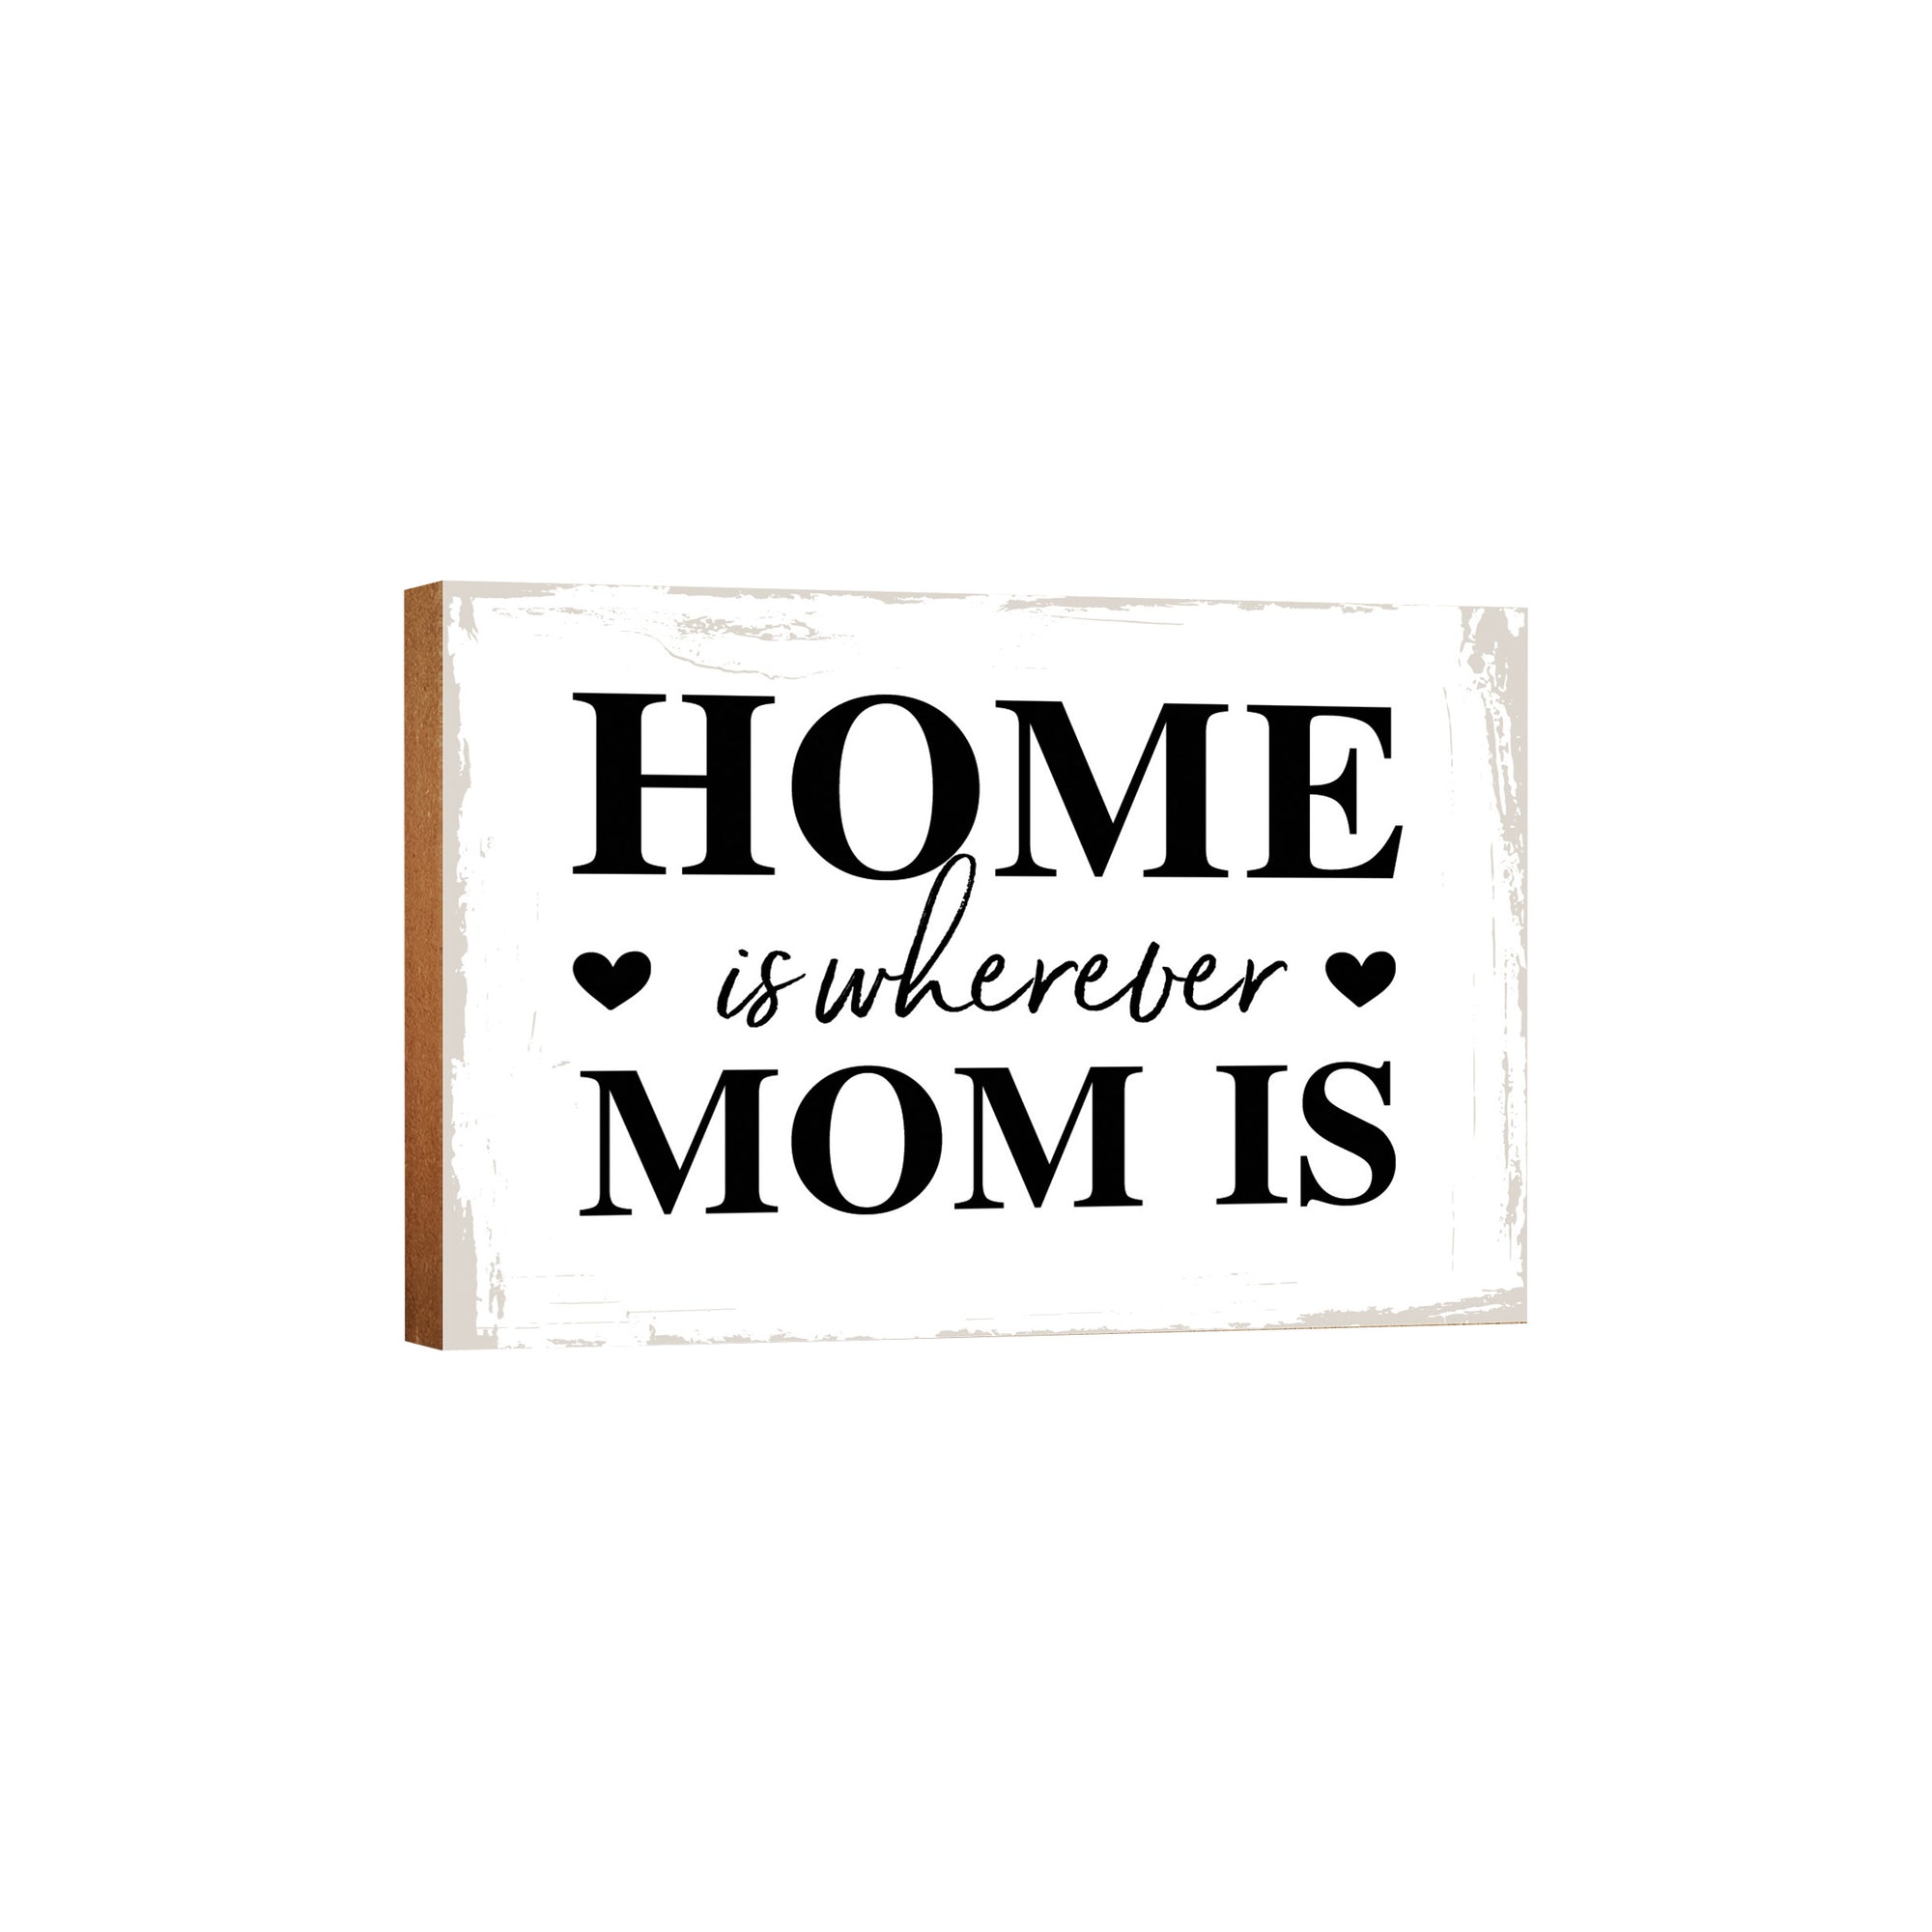 LifeSong Milestones Wooden Shelf and Tabletop Home Decor Gift for Mother’s Day